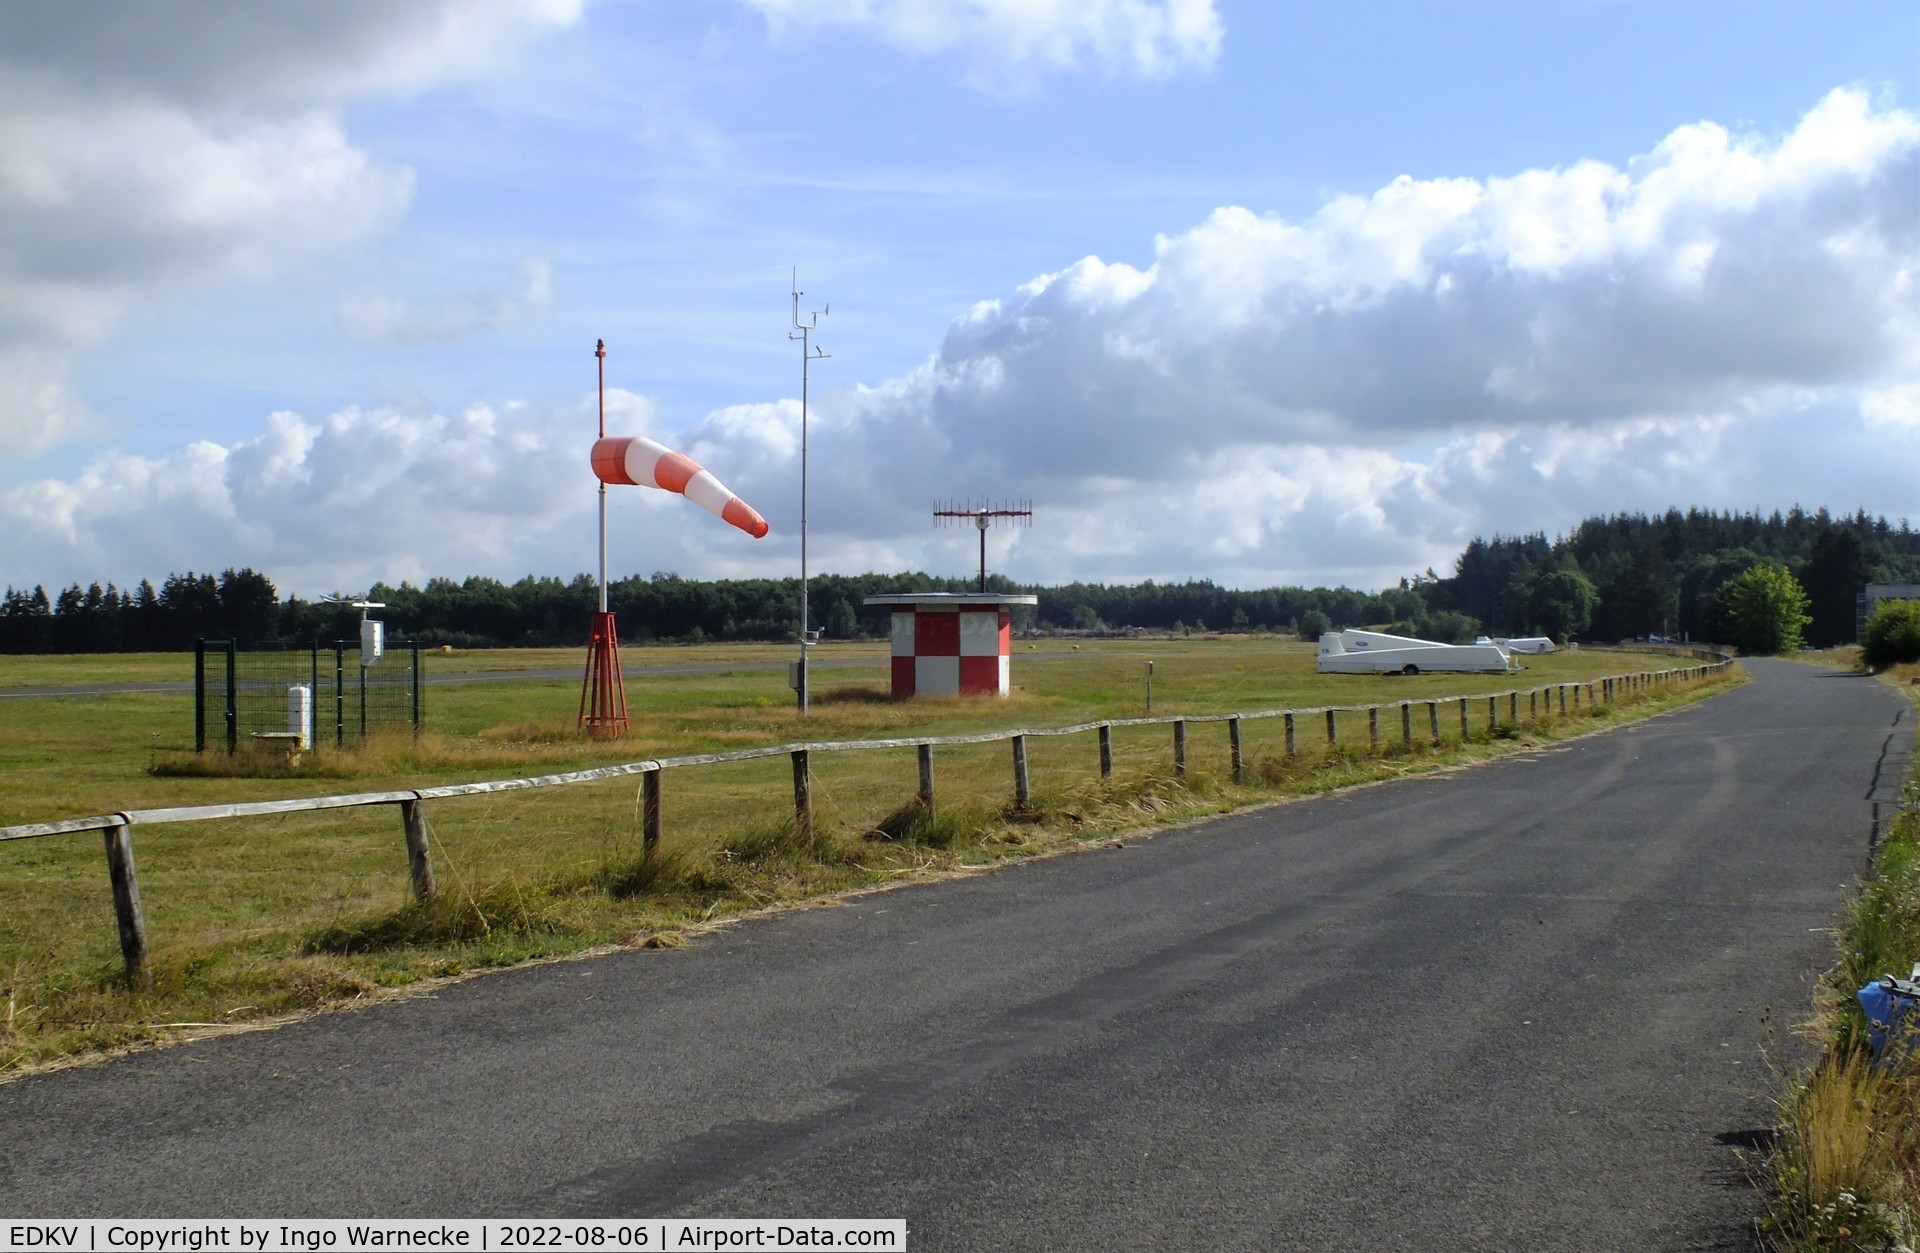 Dahlemer Binz Airport, Dahlem Germany (EDKV) - looking east at the western end of the public enclosure at Dahlemer Binz airfield